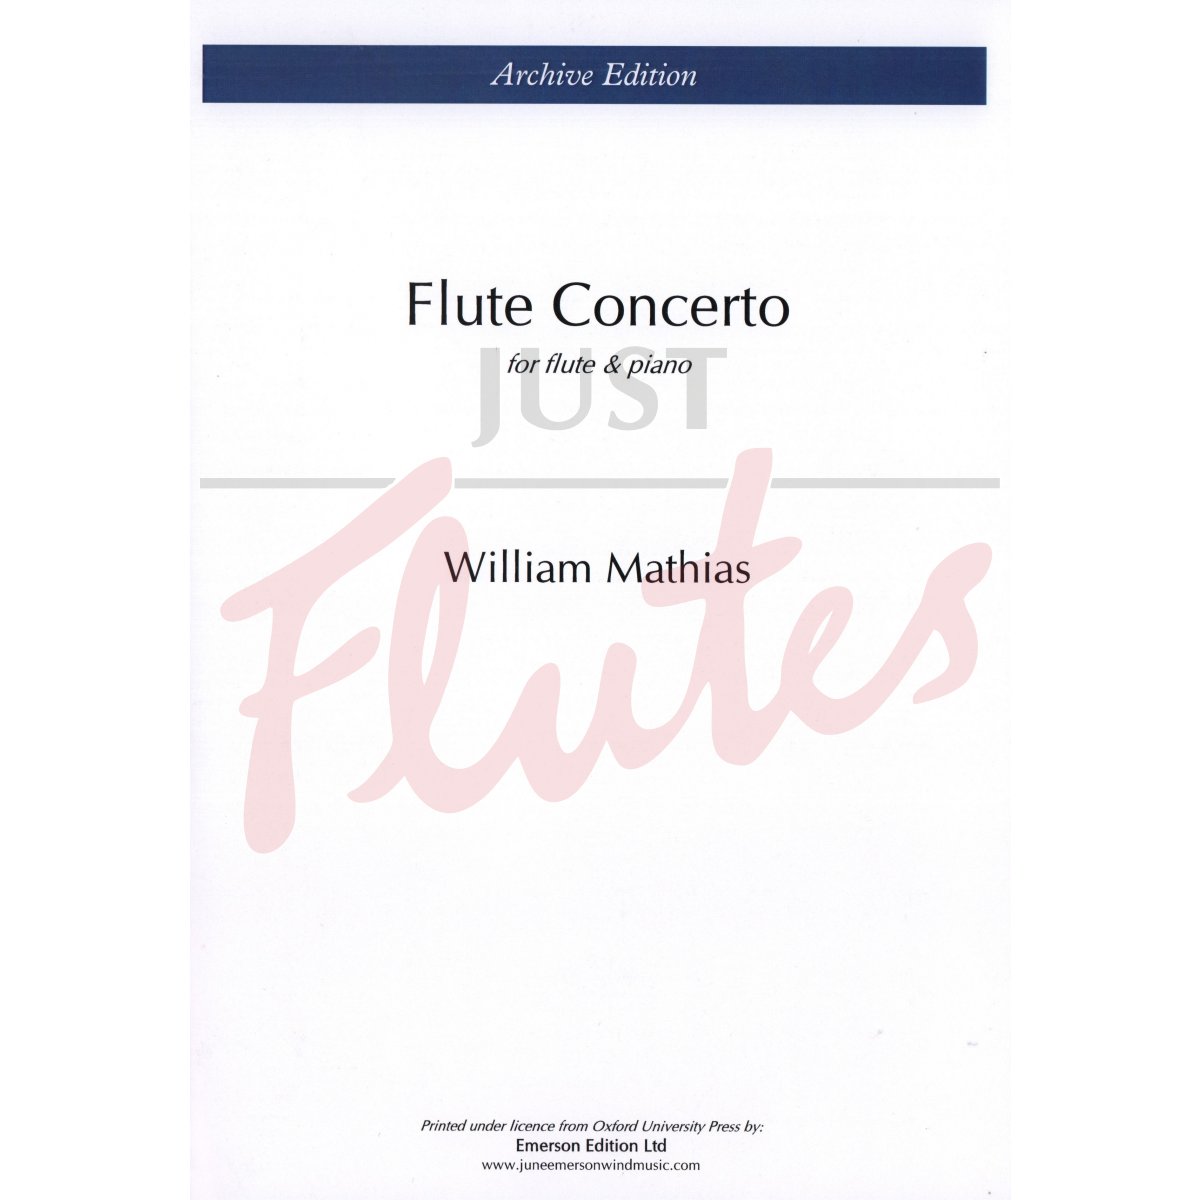 Flute Concerto for Flute and Piano